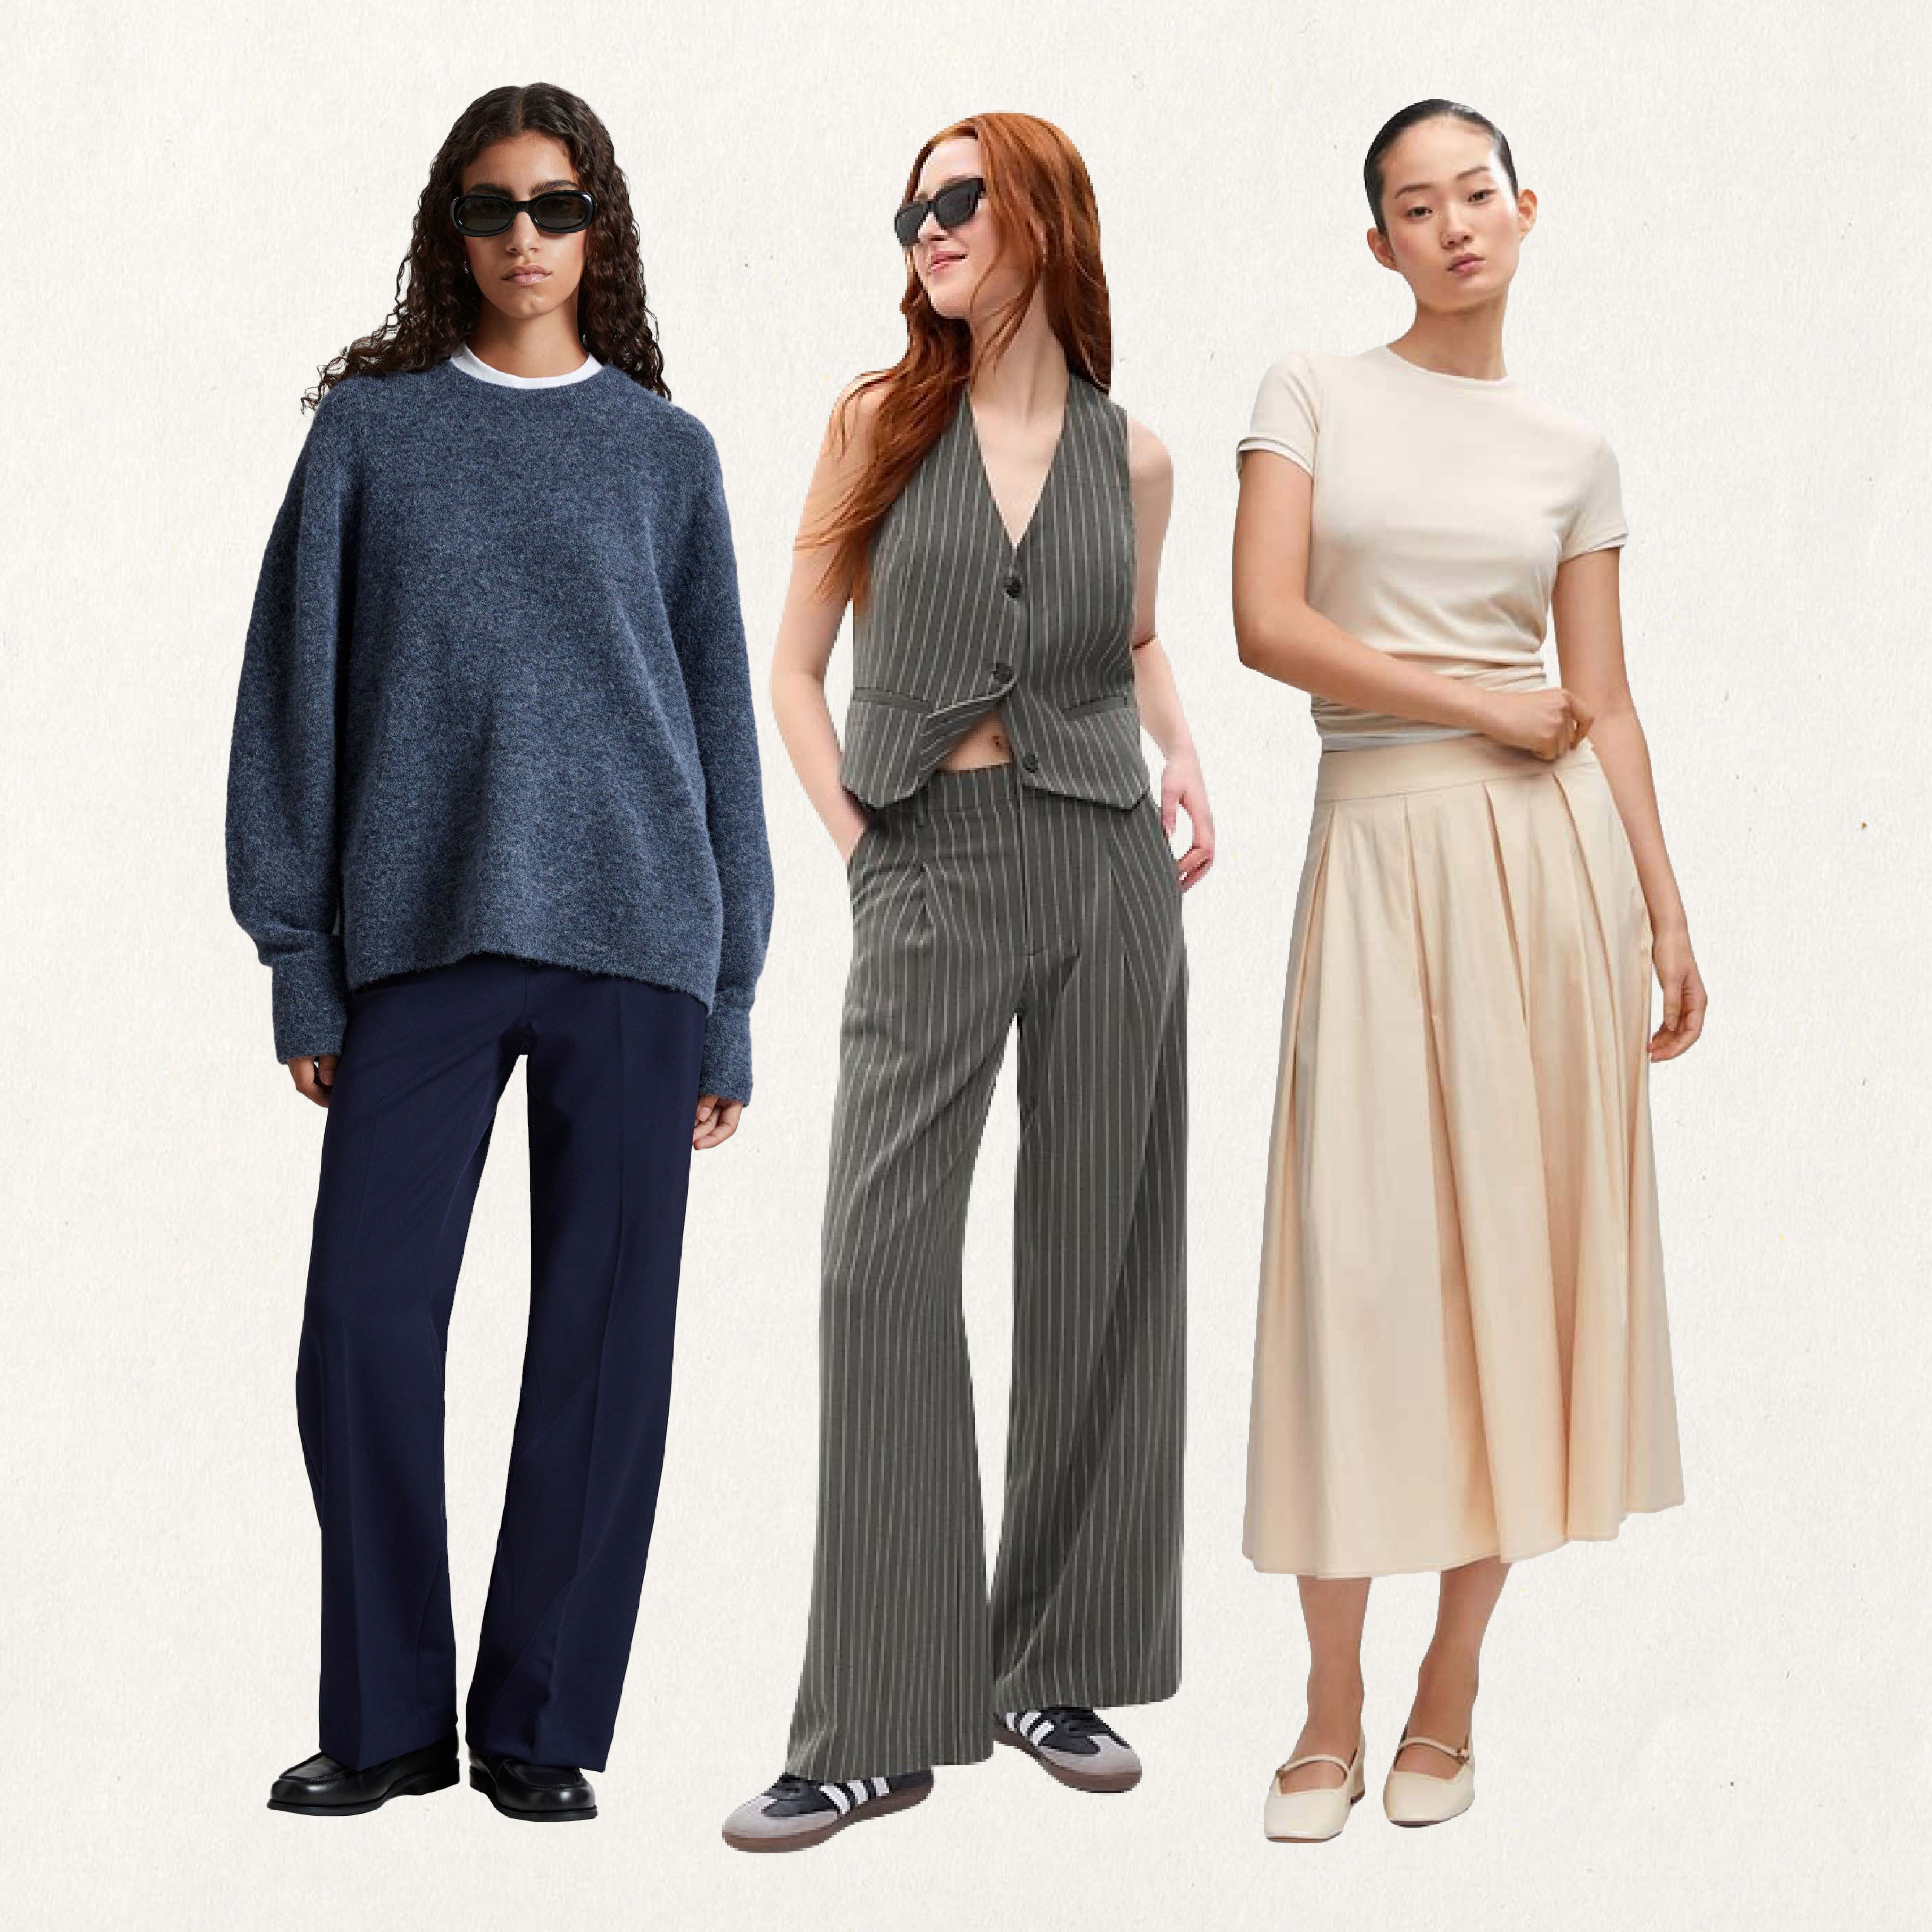 30 Under-$150 Fall Fashion Items to Wear to Work